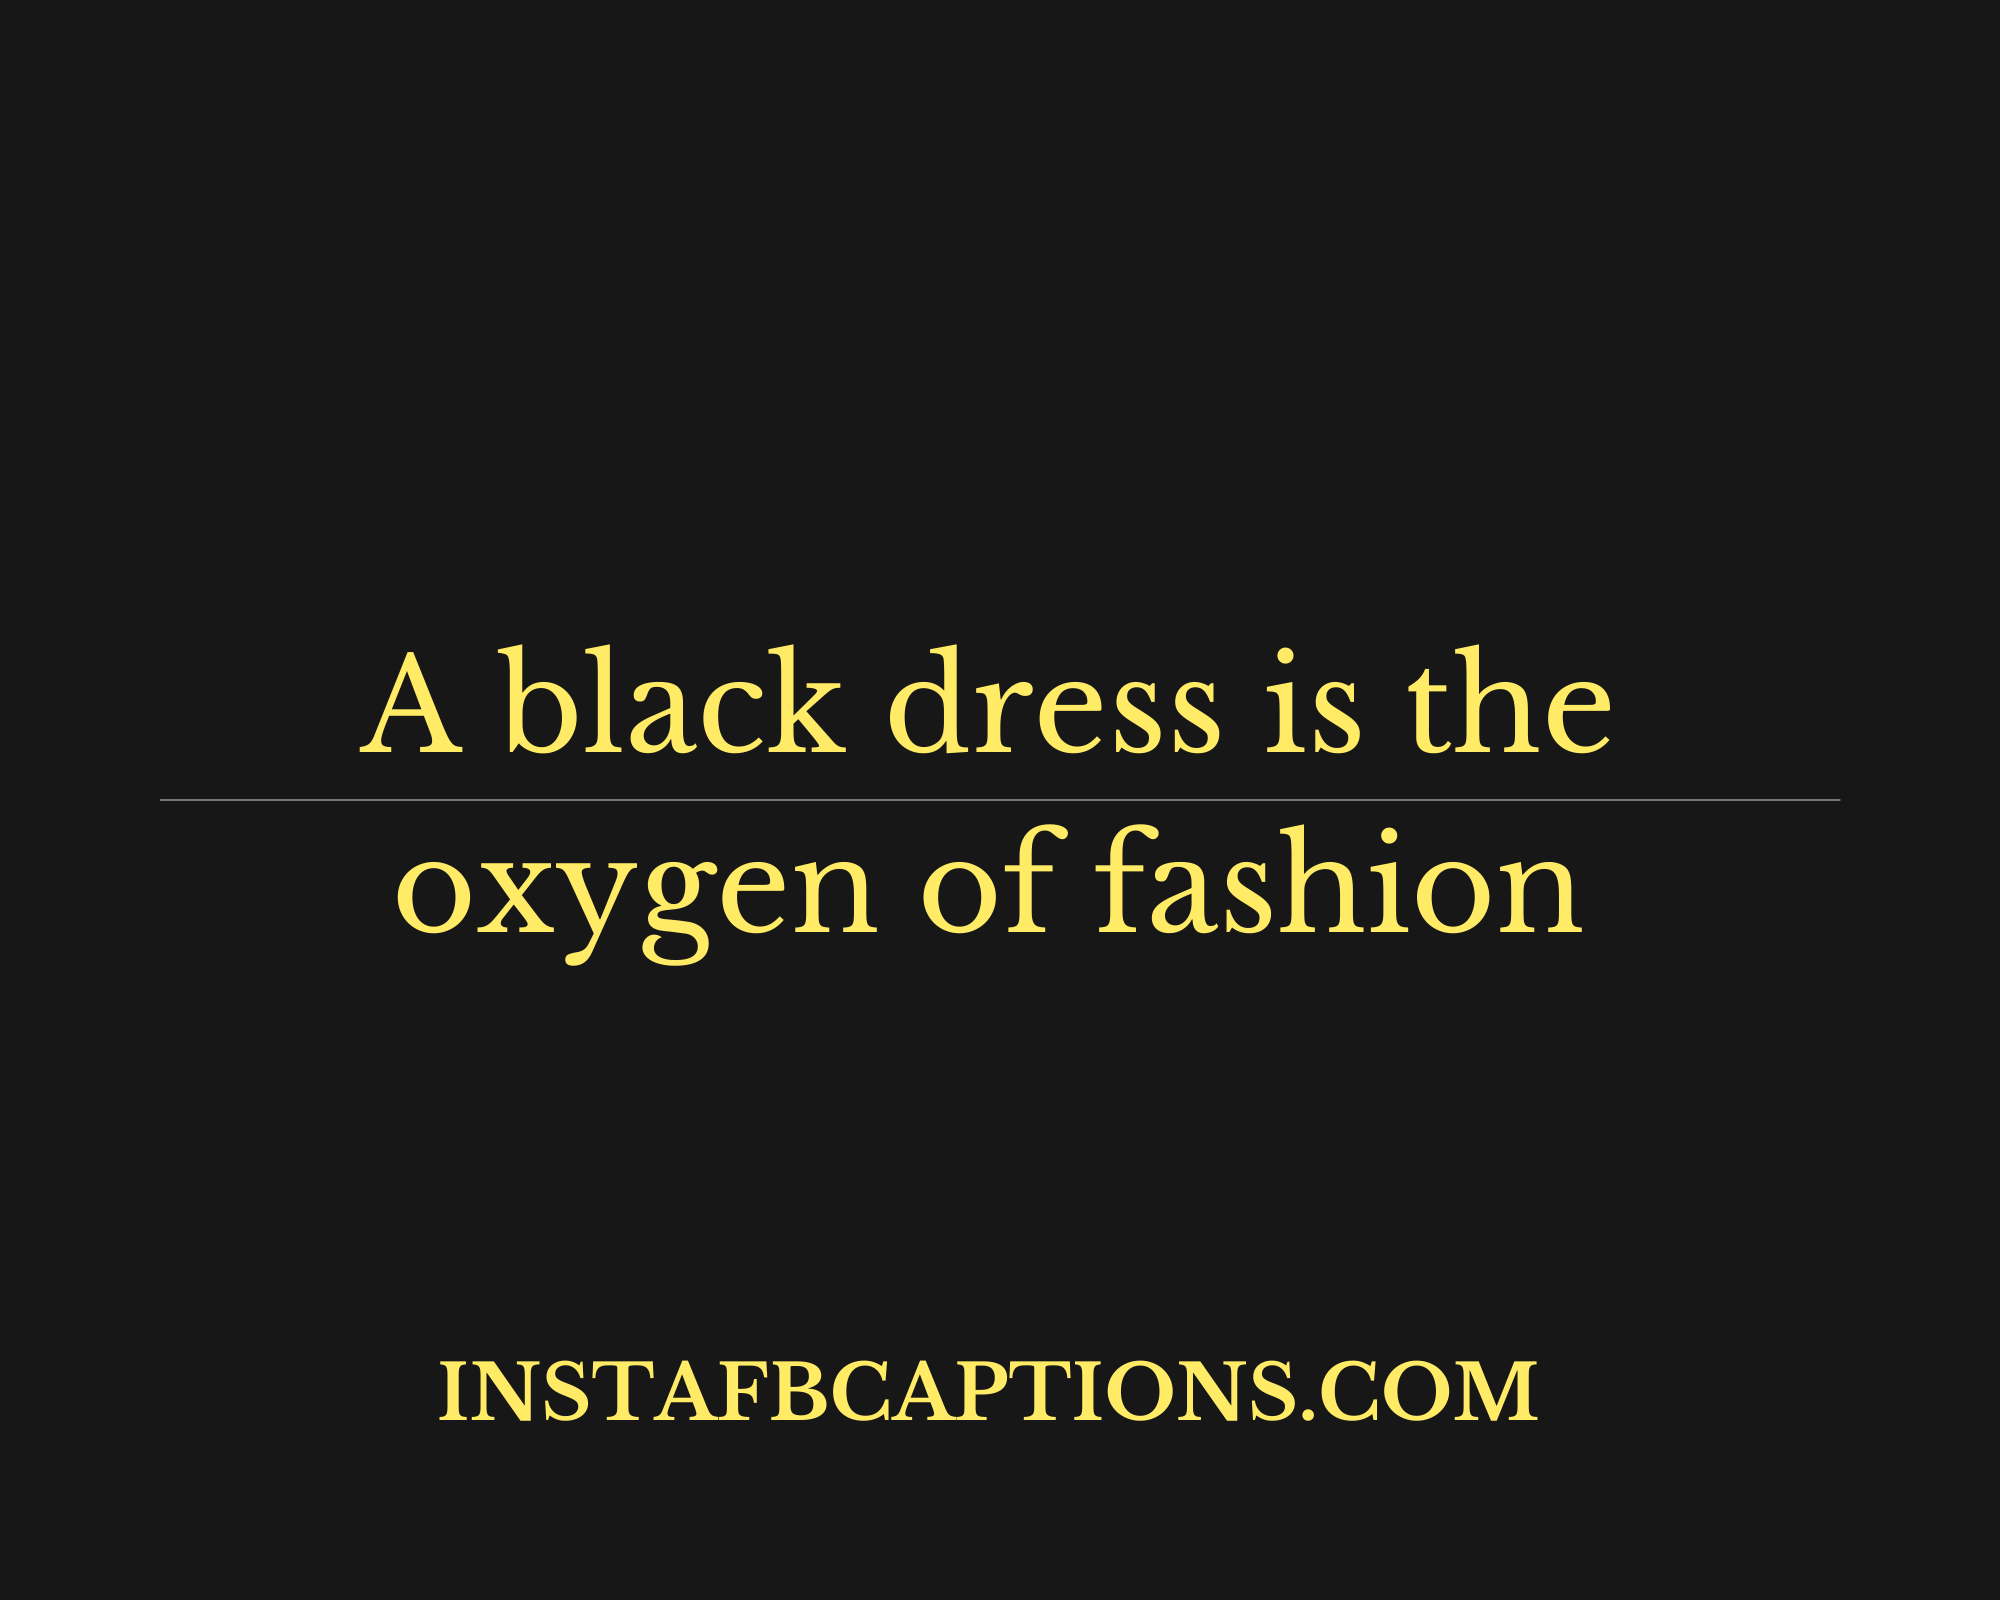 Catchy Instagram Captions For Black Outfit Pictures  - Catchy Instagram Captions for Black Outfit Pictures - 98 Black Dress Instagram Captions in 2022